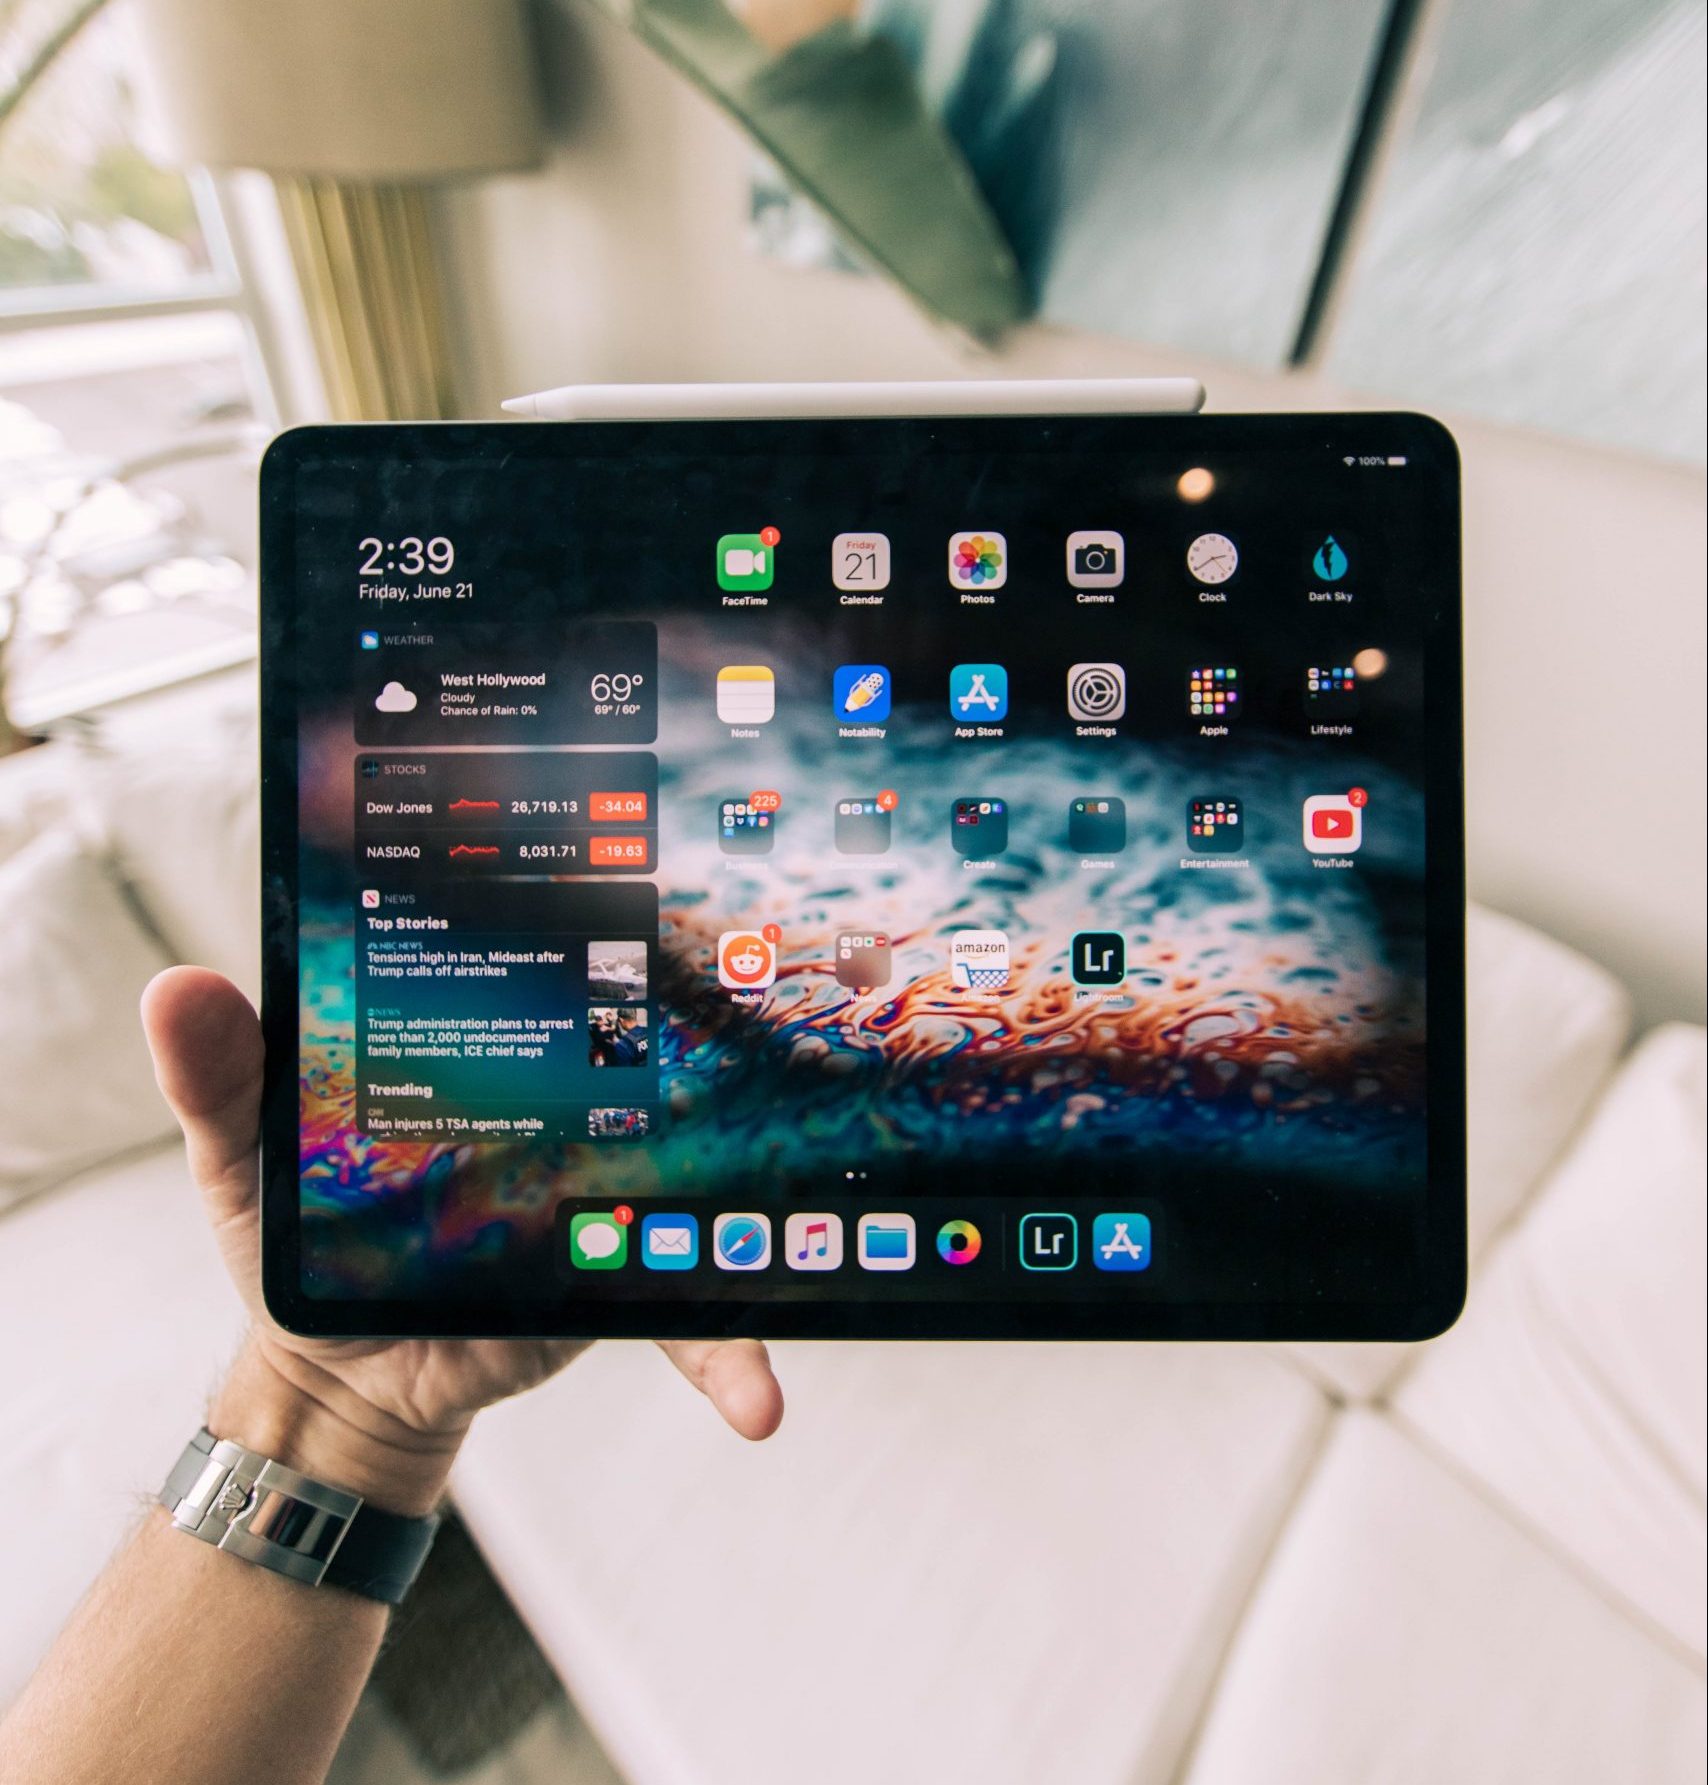 A photograph shows a person holding an iPad pro. There are colorful widgets and apps on the screen.